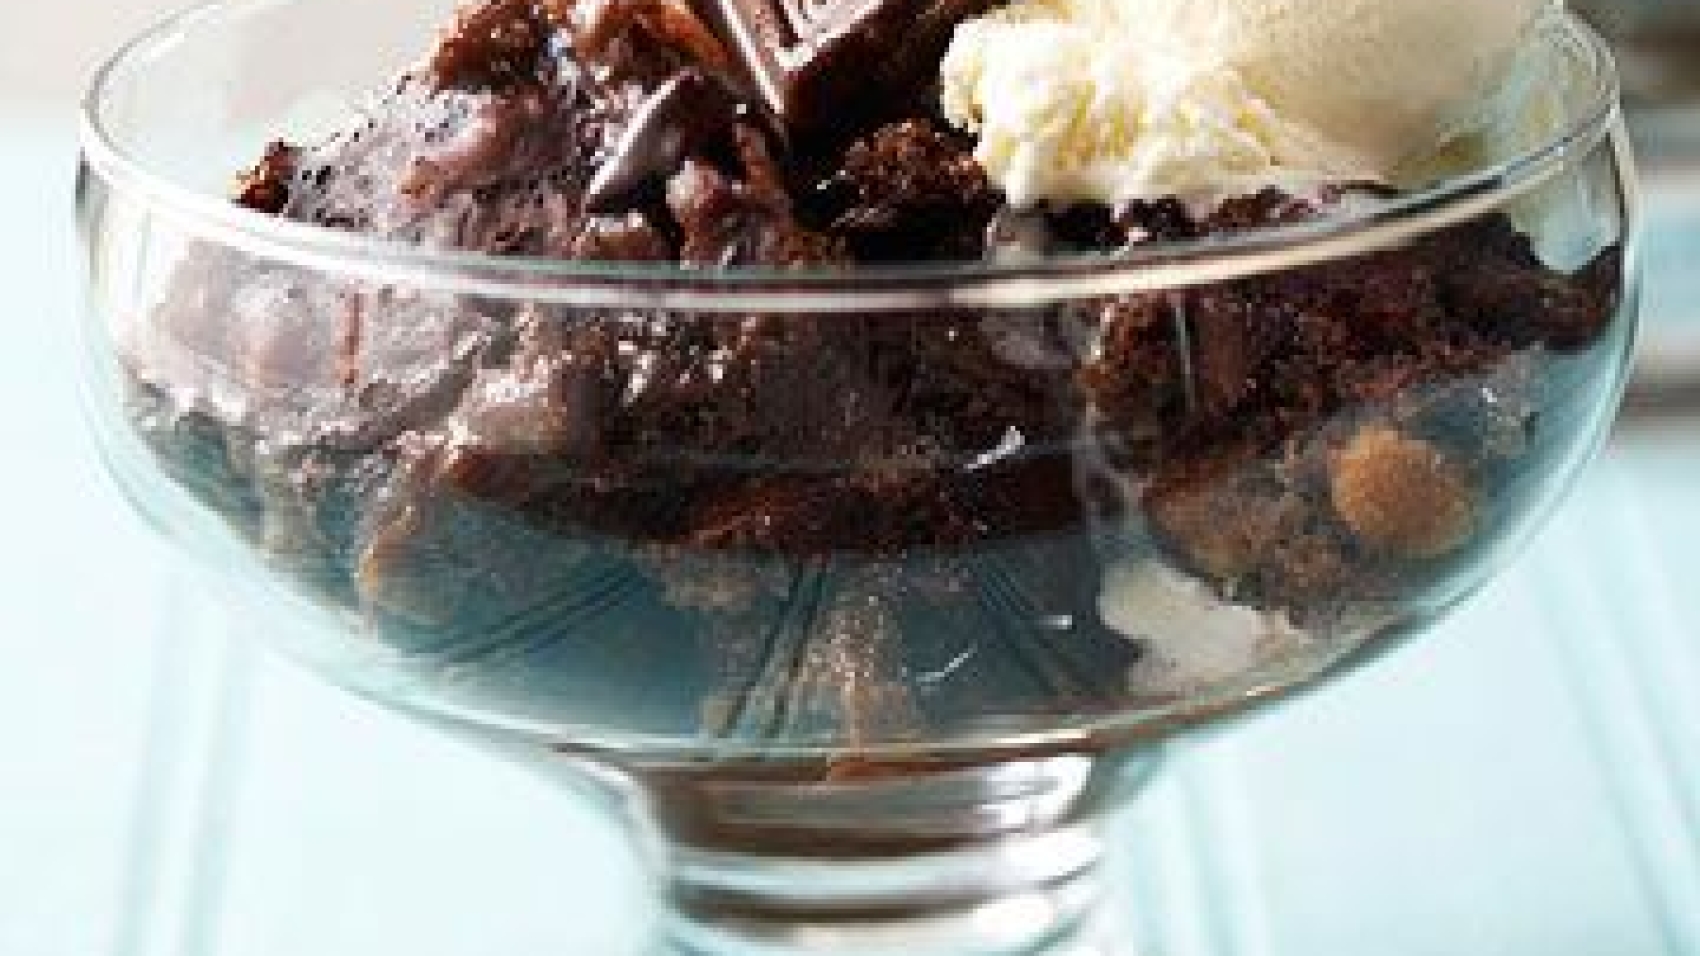 Krystal kinney Desserts That ‘Bake’ Themselves in Your Slow Cooker